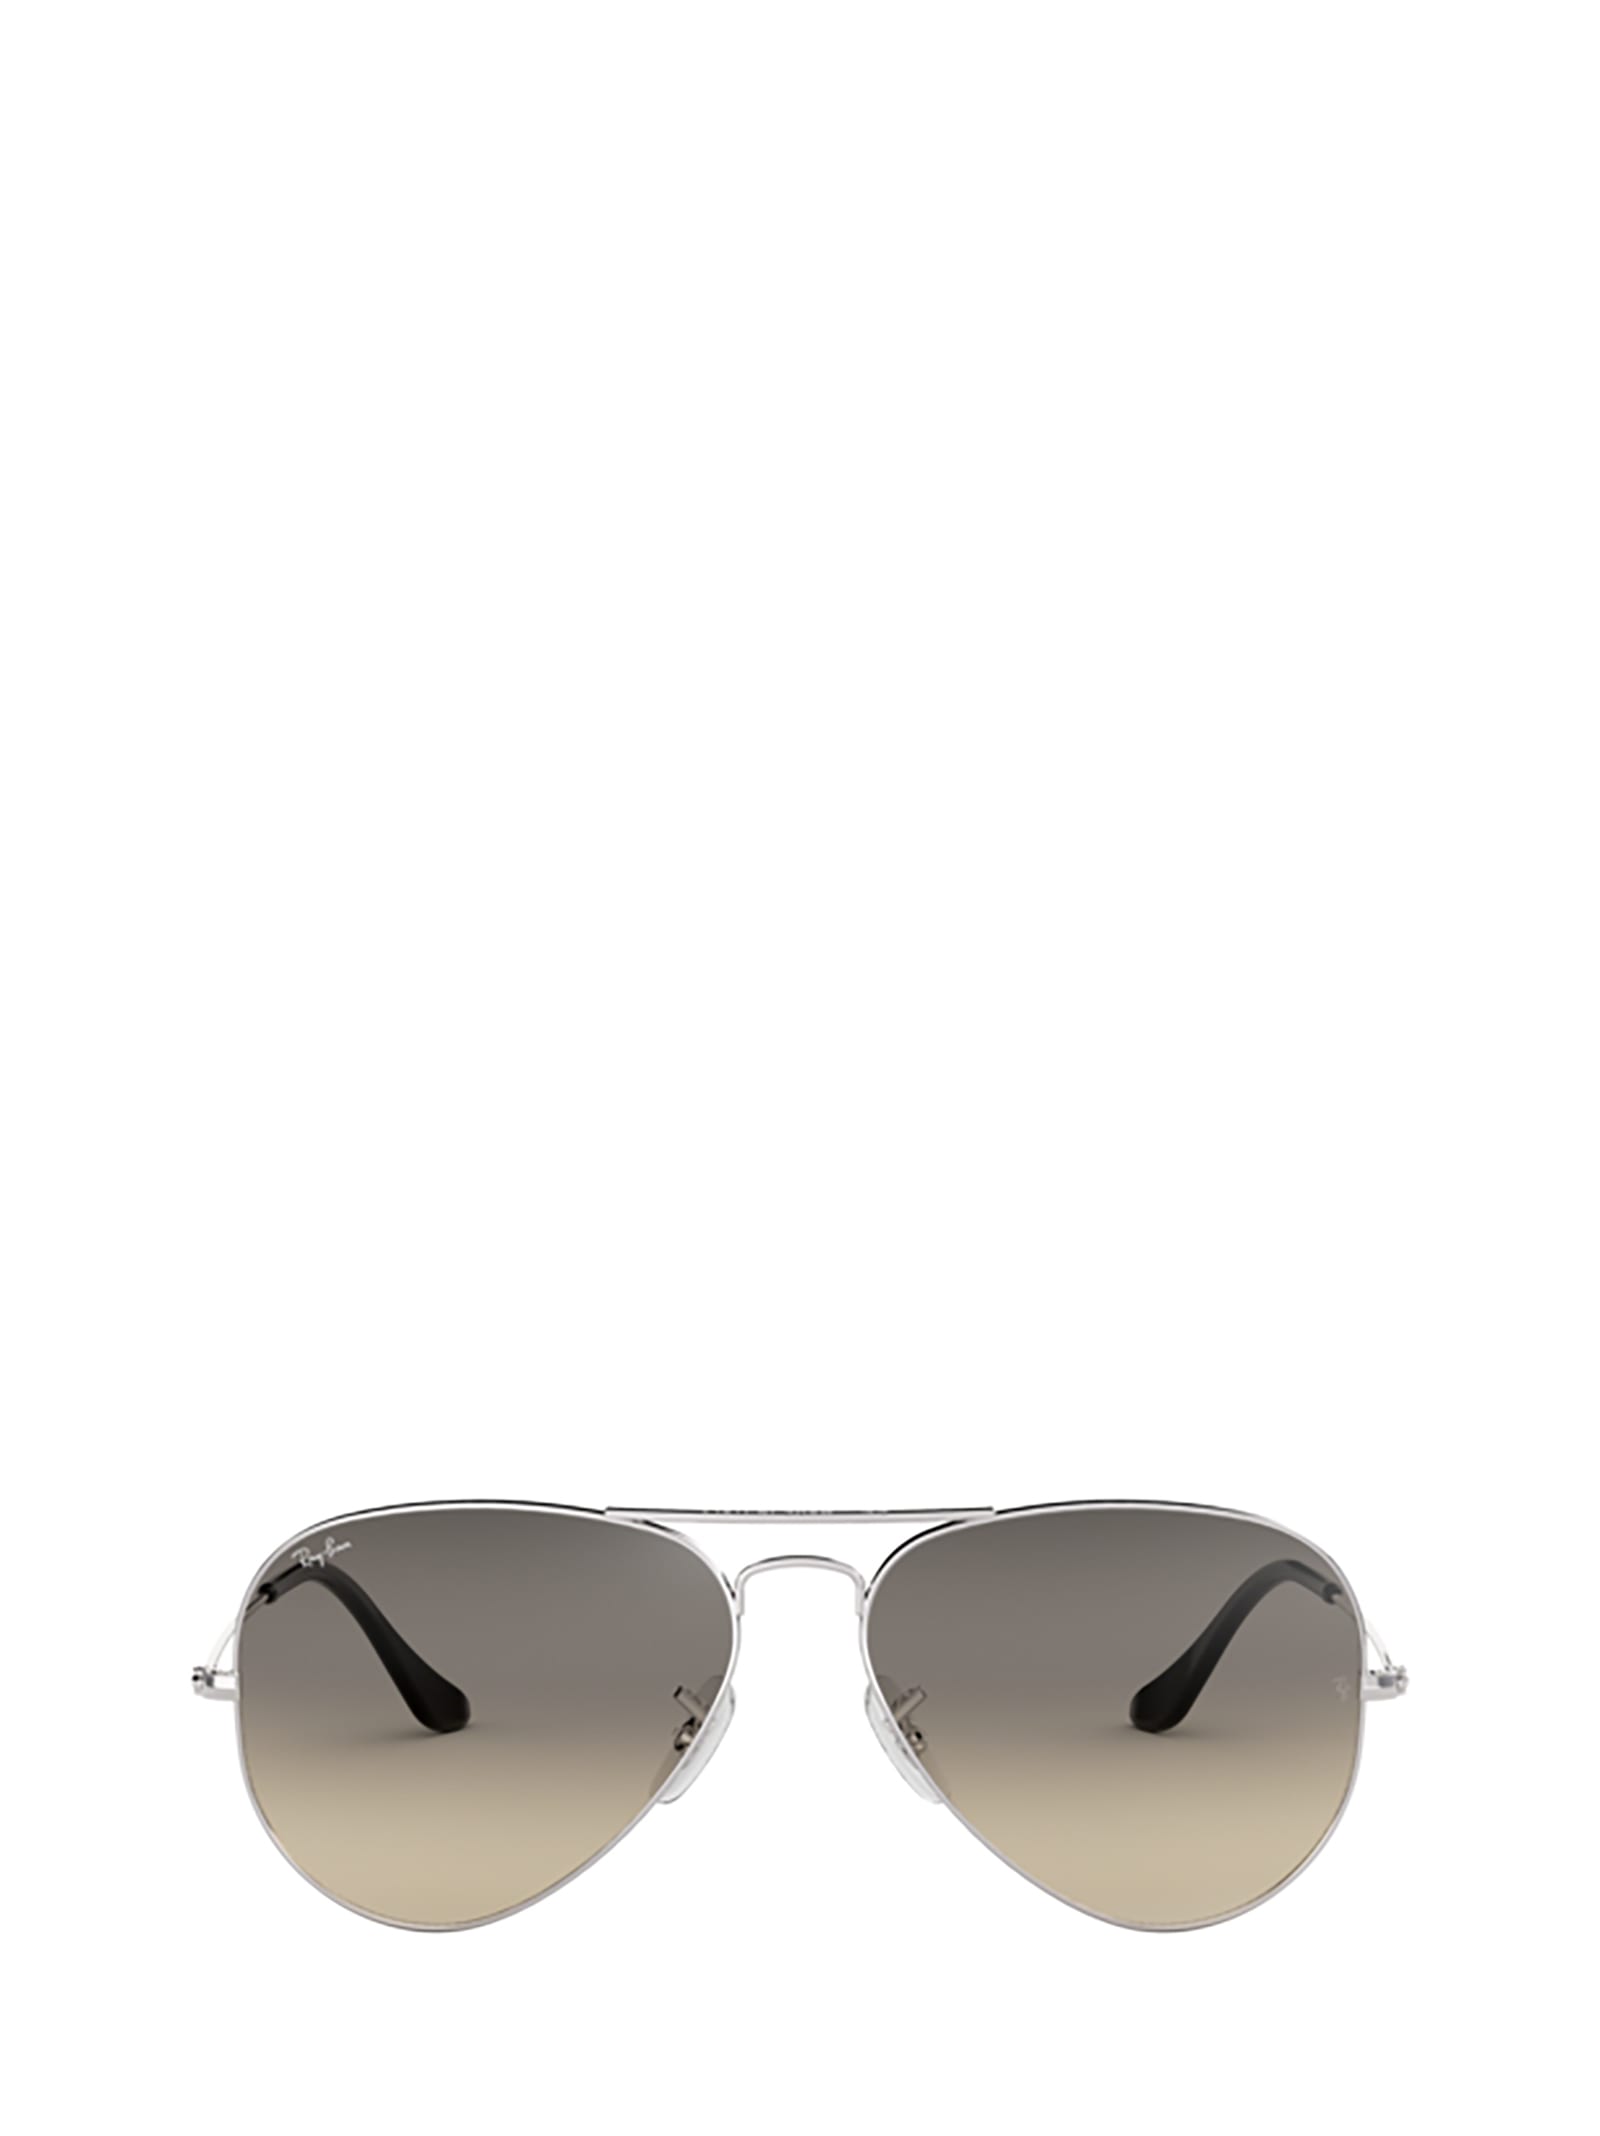 Ray-Ban Rb3025 Silver Sunglasses